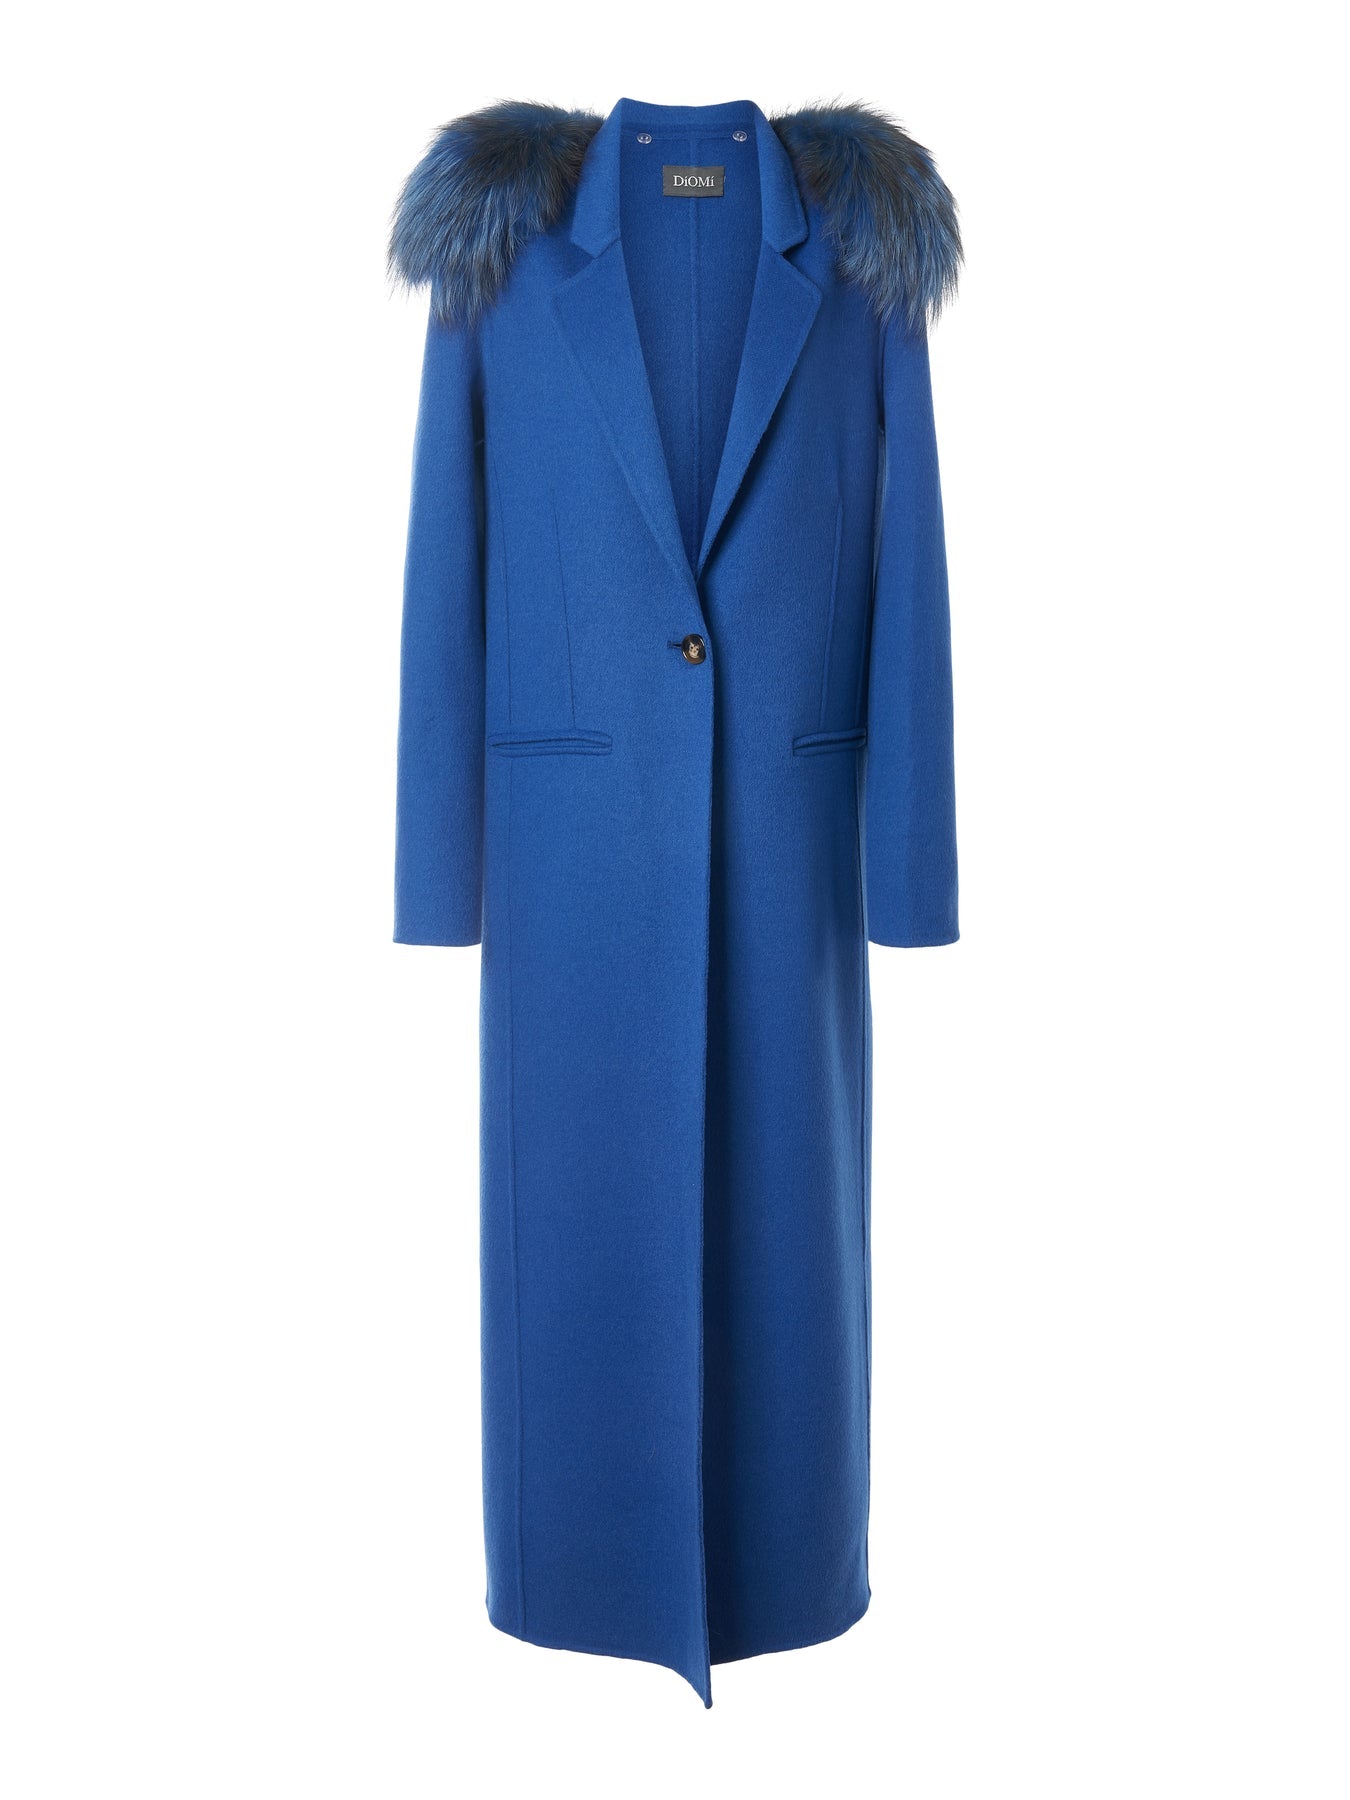 Wool Blend Long Trench